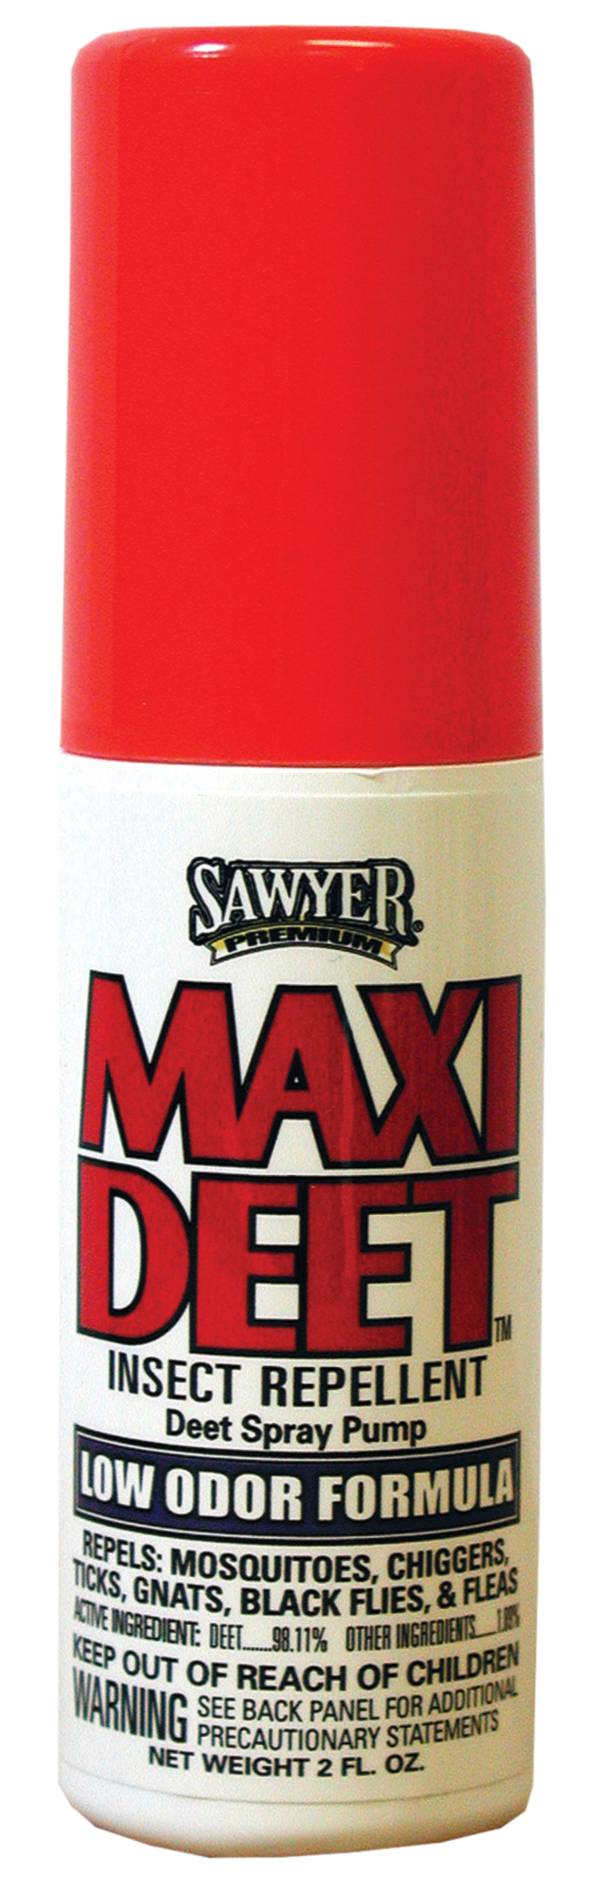 Sawyer Premium MAXI-DEET Insect Repellent product image